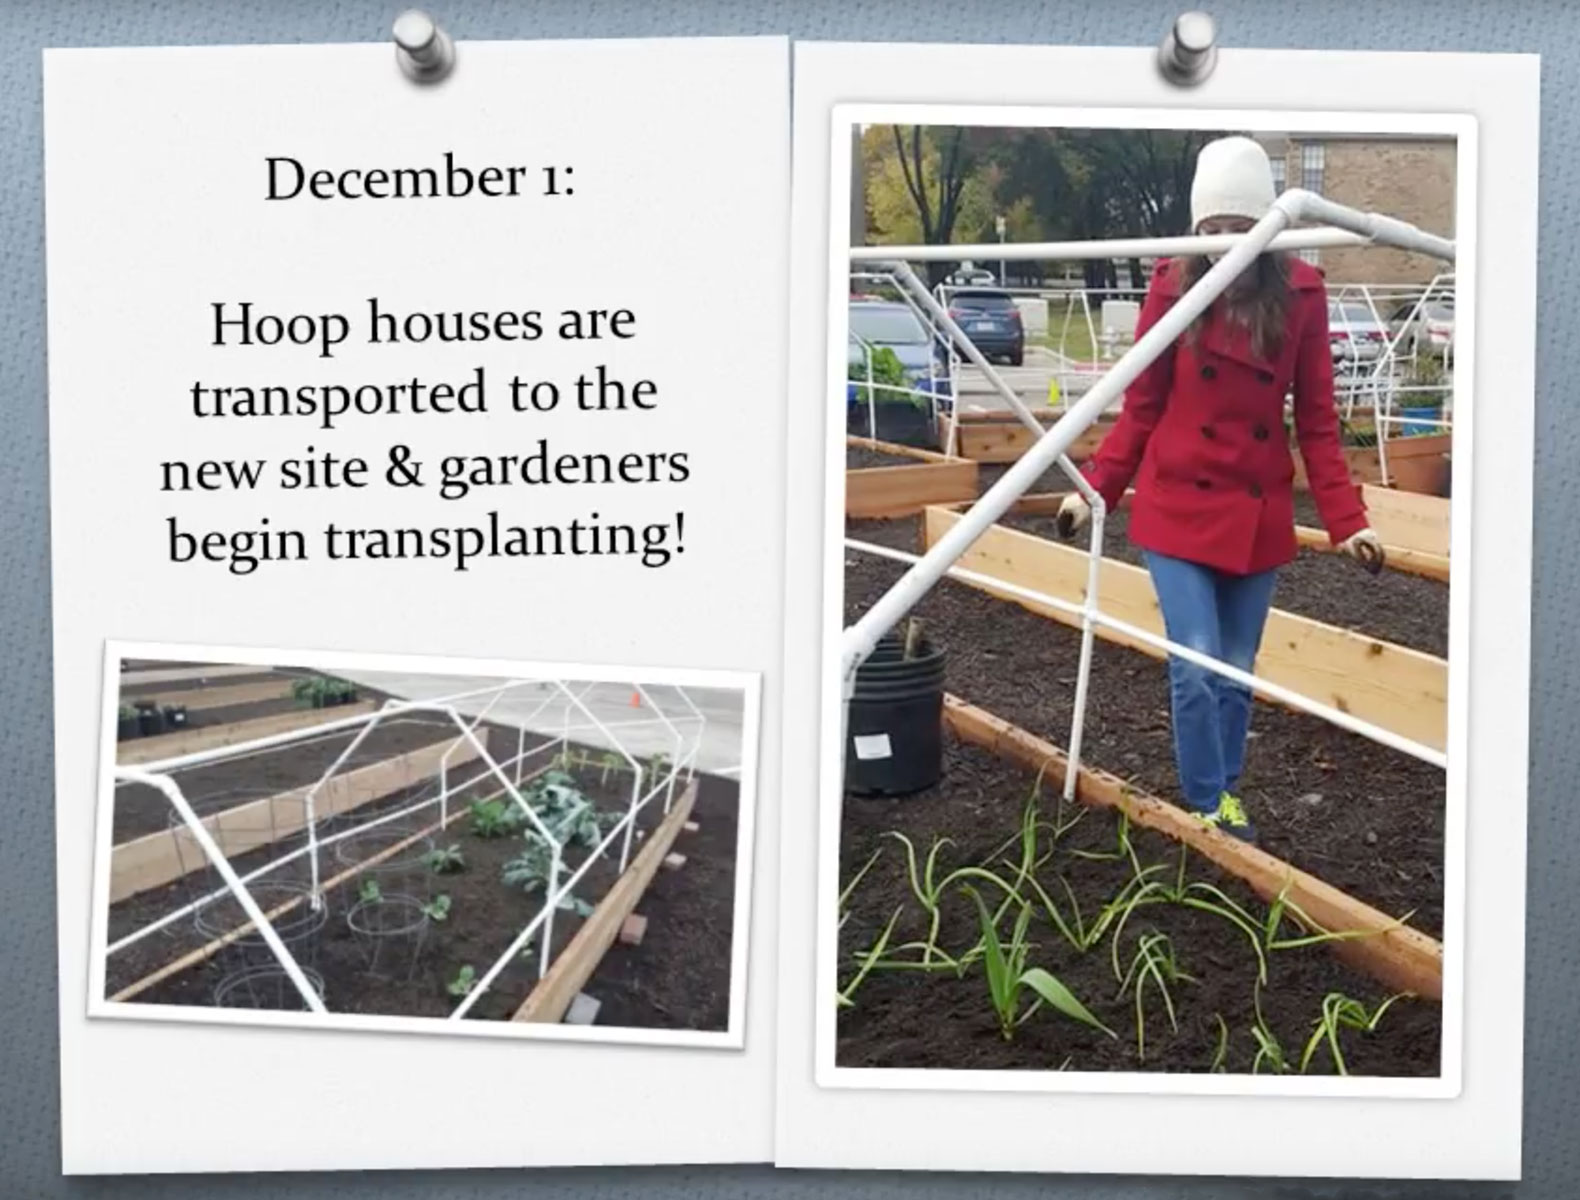 An open scrapbook full of photos and notes from the garden, one of which reads “December 1: Hoop houses are transported to the new site & gardeners begin transplanting!”